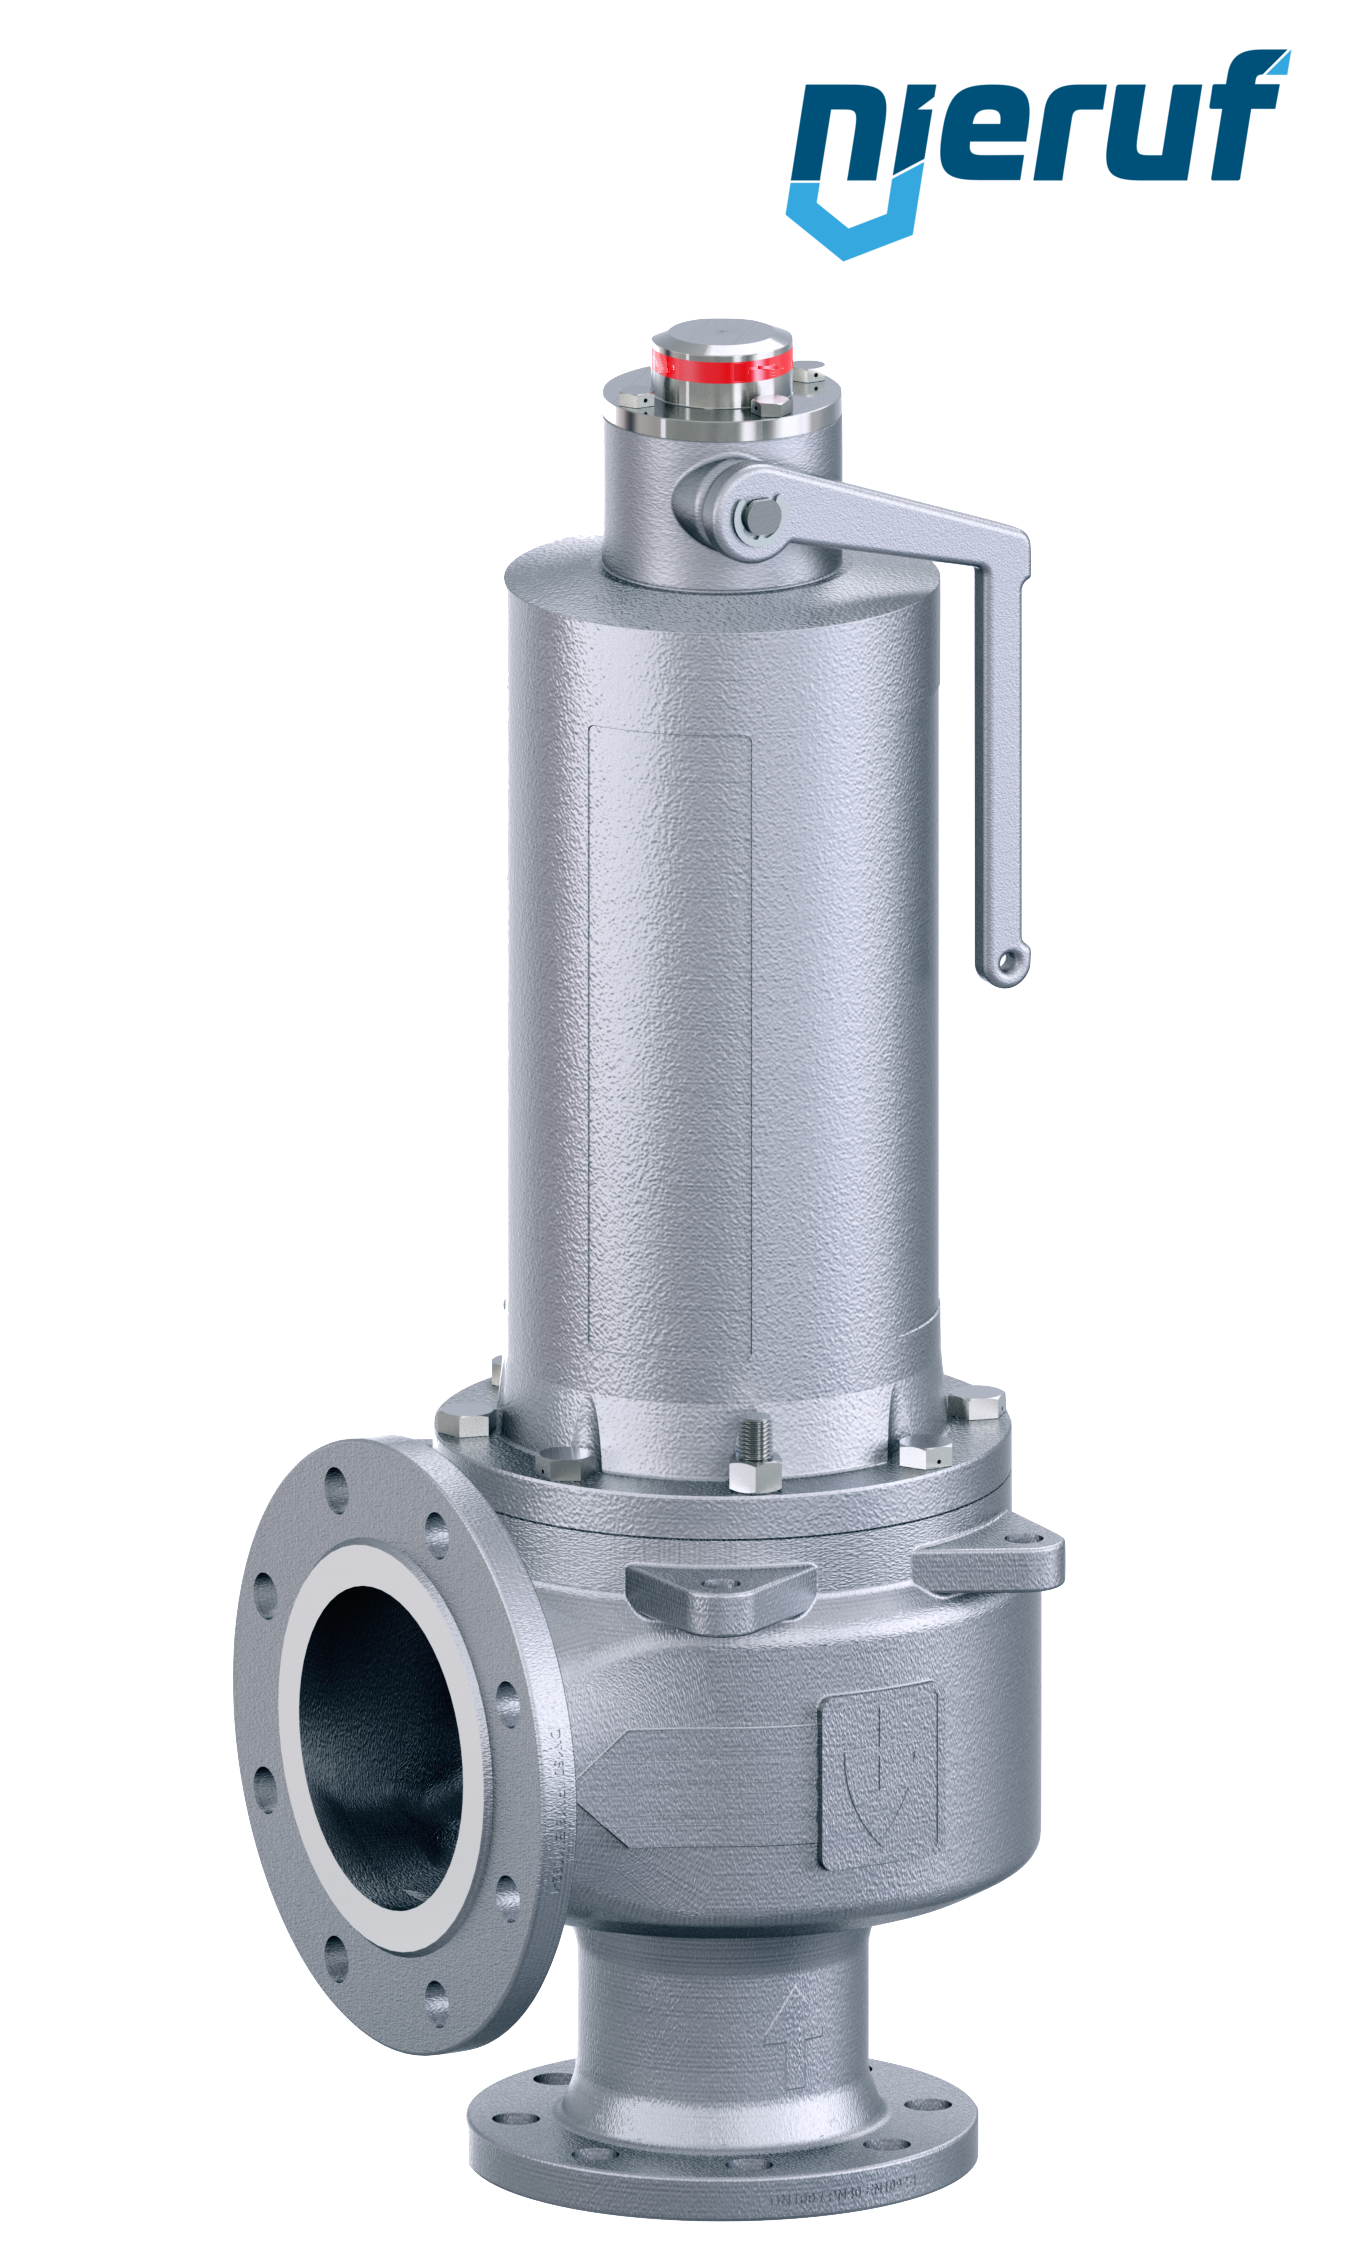 flange-safety valve DN65/DN100 SF04, stainless steel metal, with lifting device lever